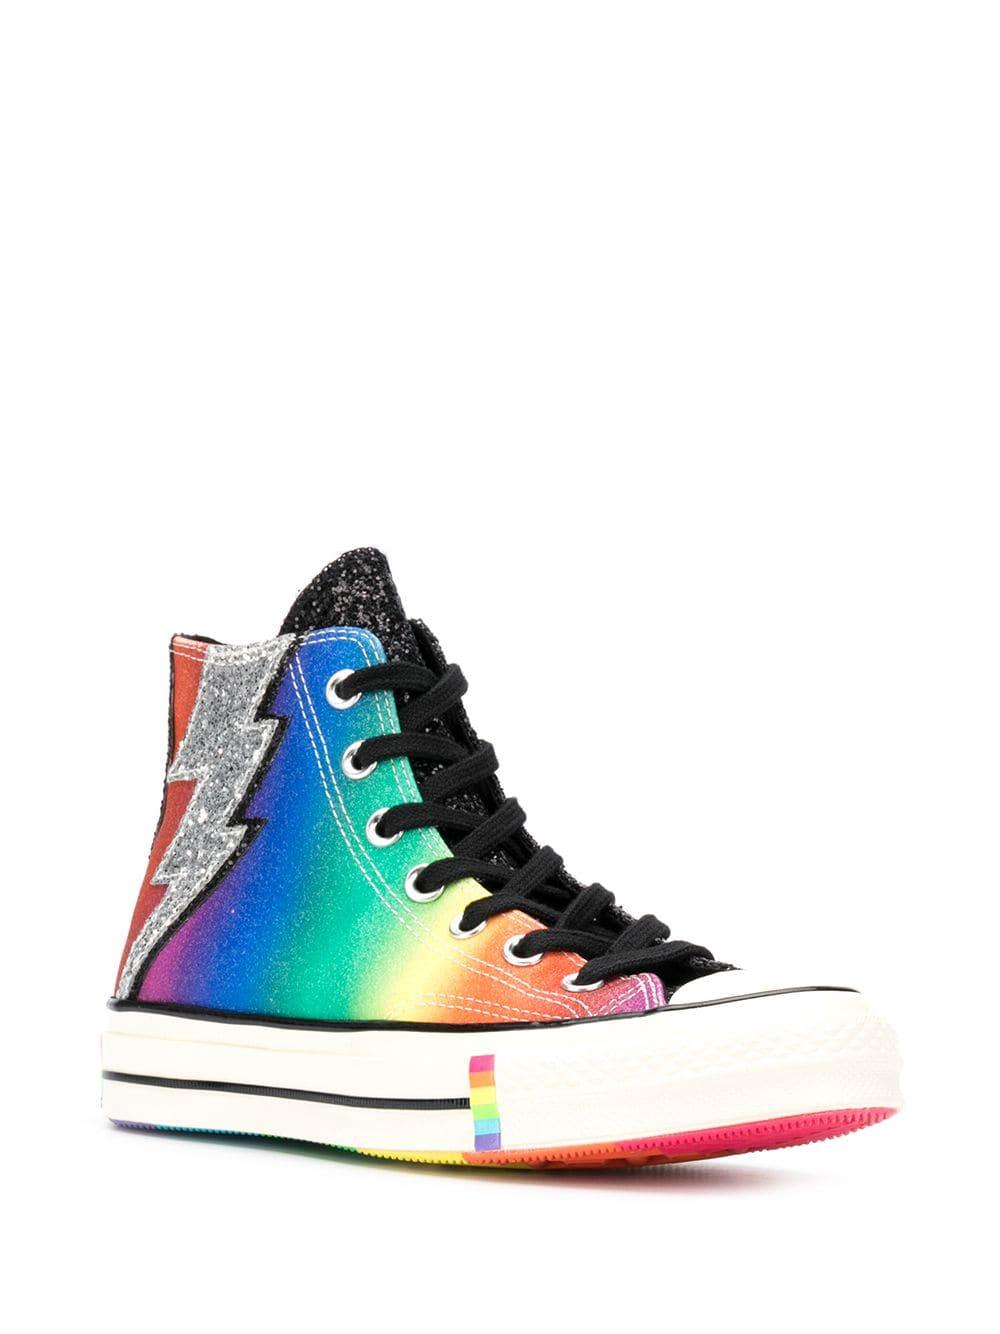 Converse Canvas Rainbow Sneakers in Black | Lyst